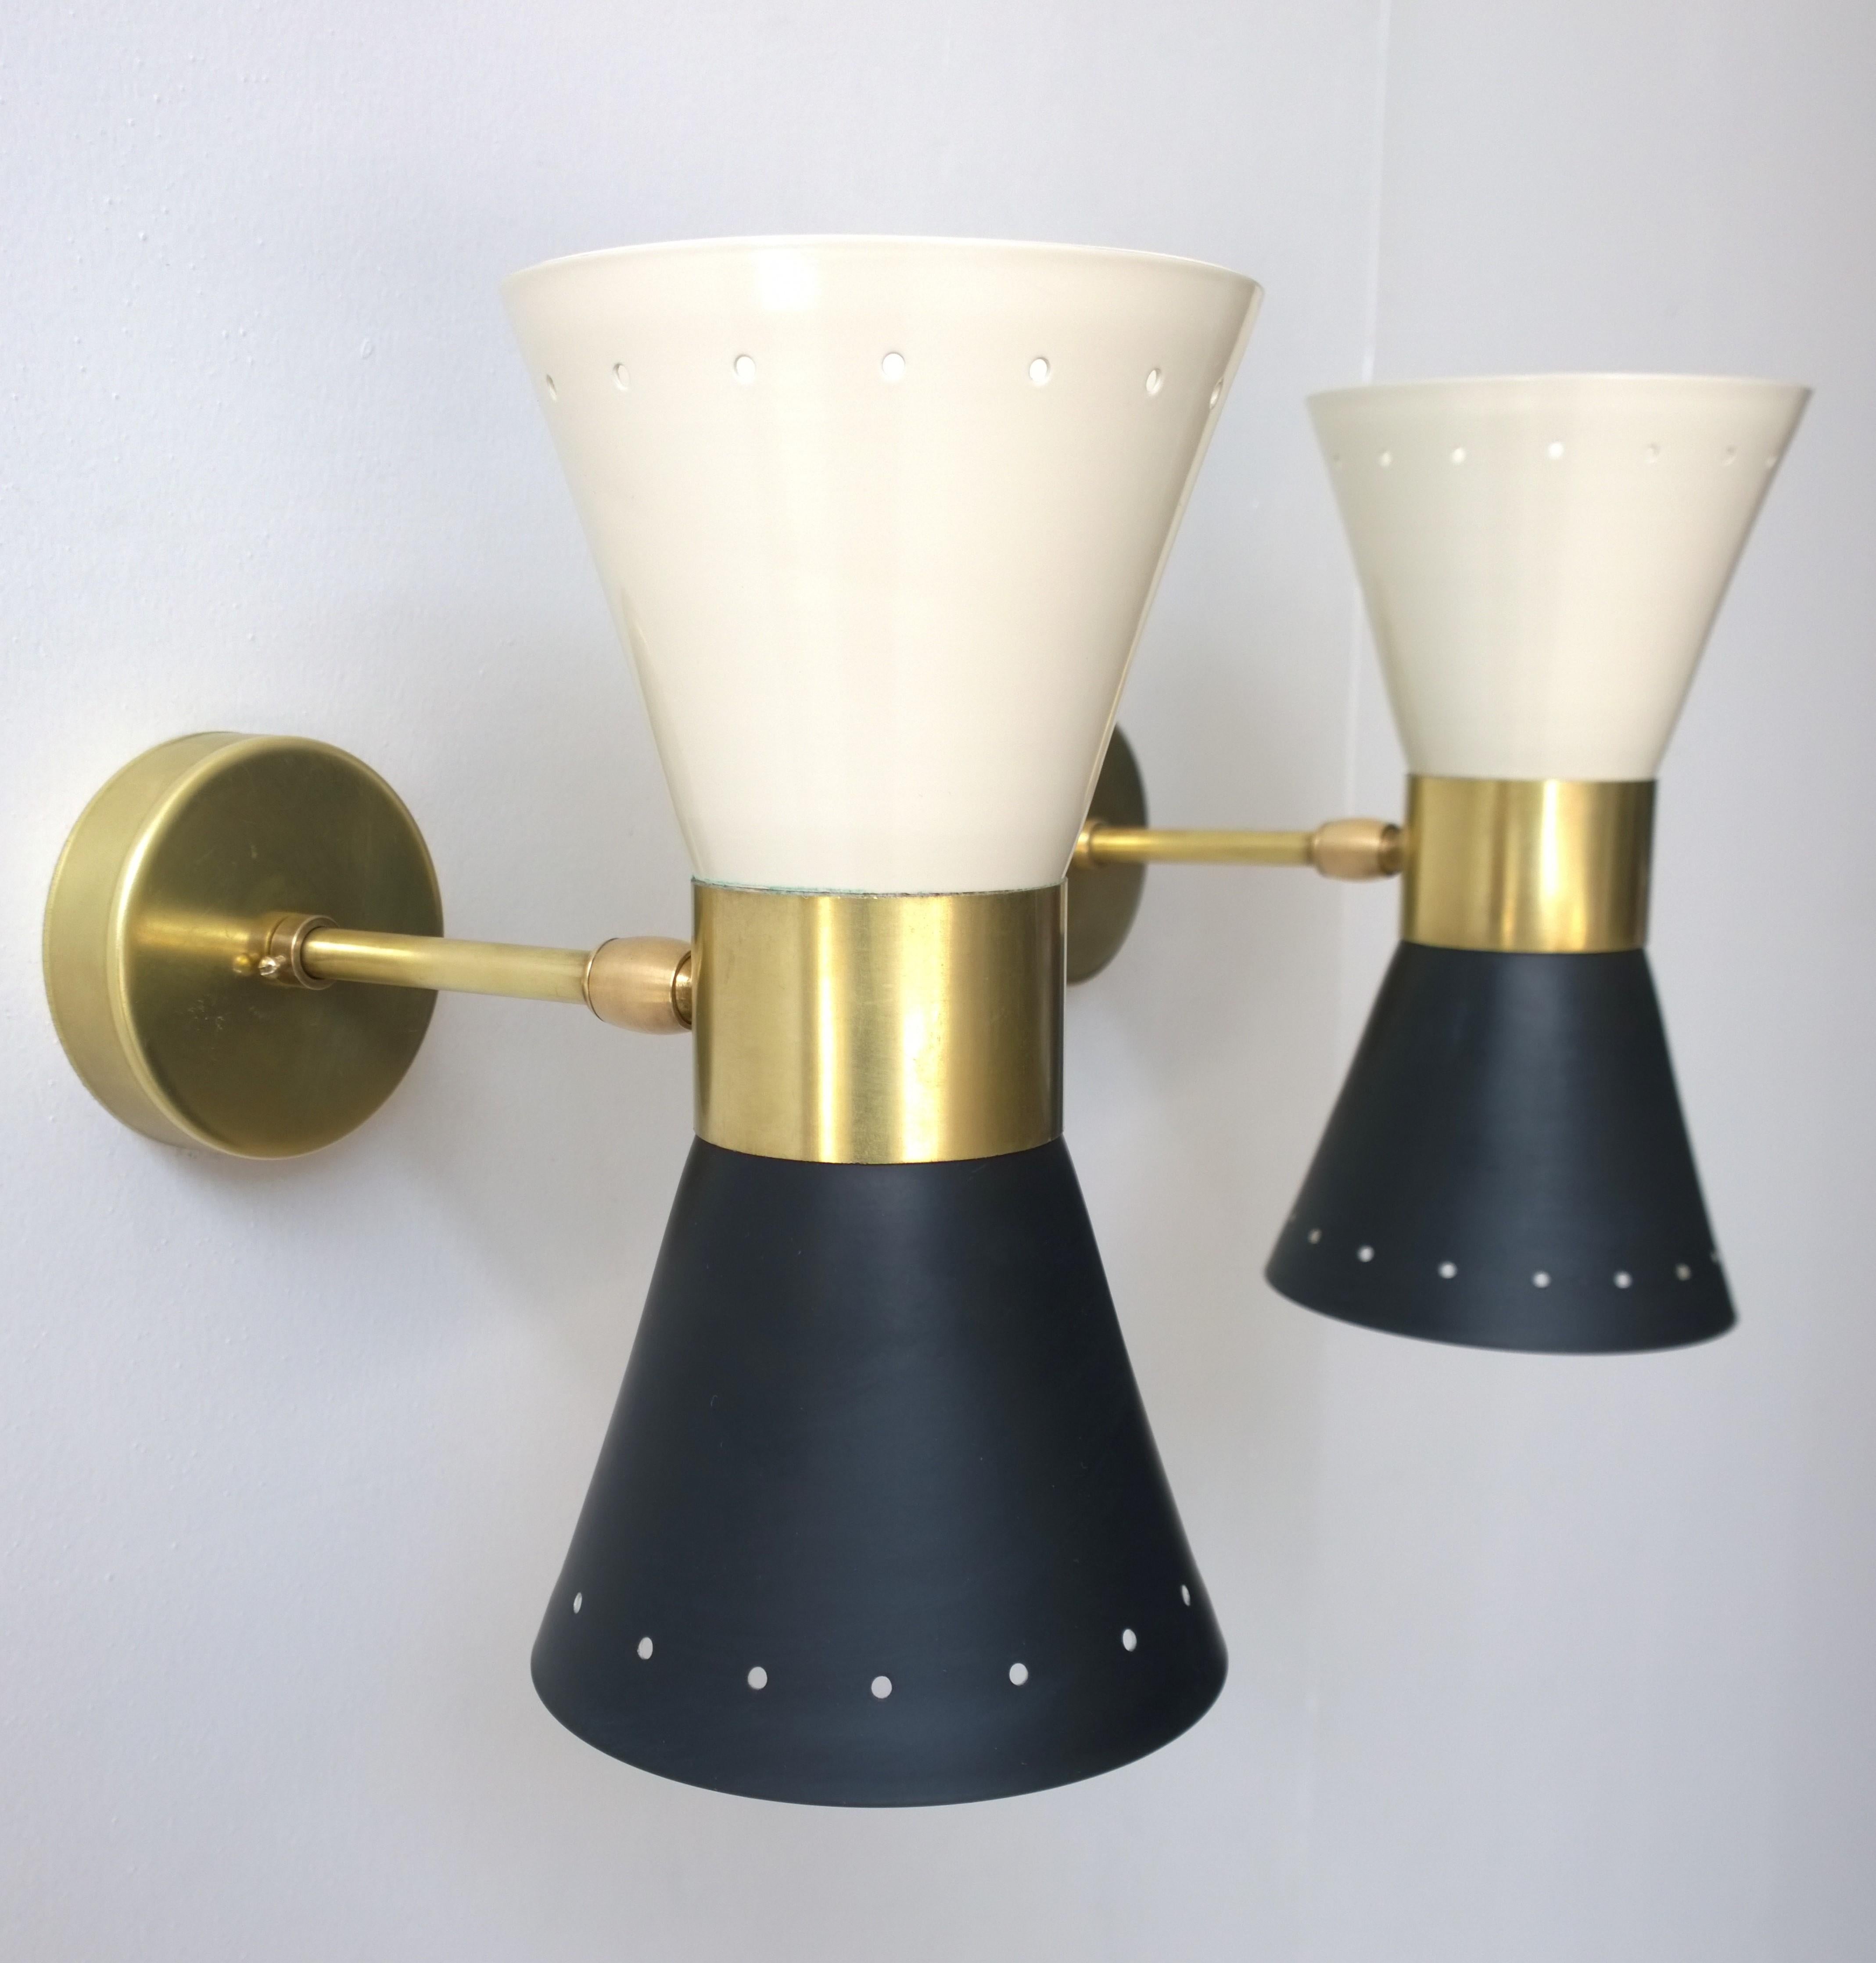 Black & White Newly Enameled Brass Double Cone Sconces with Brass Accents, Pair For Sale 1